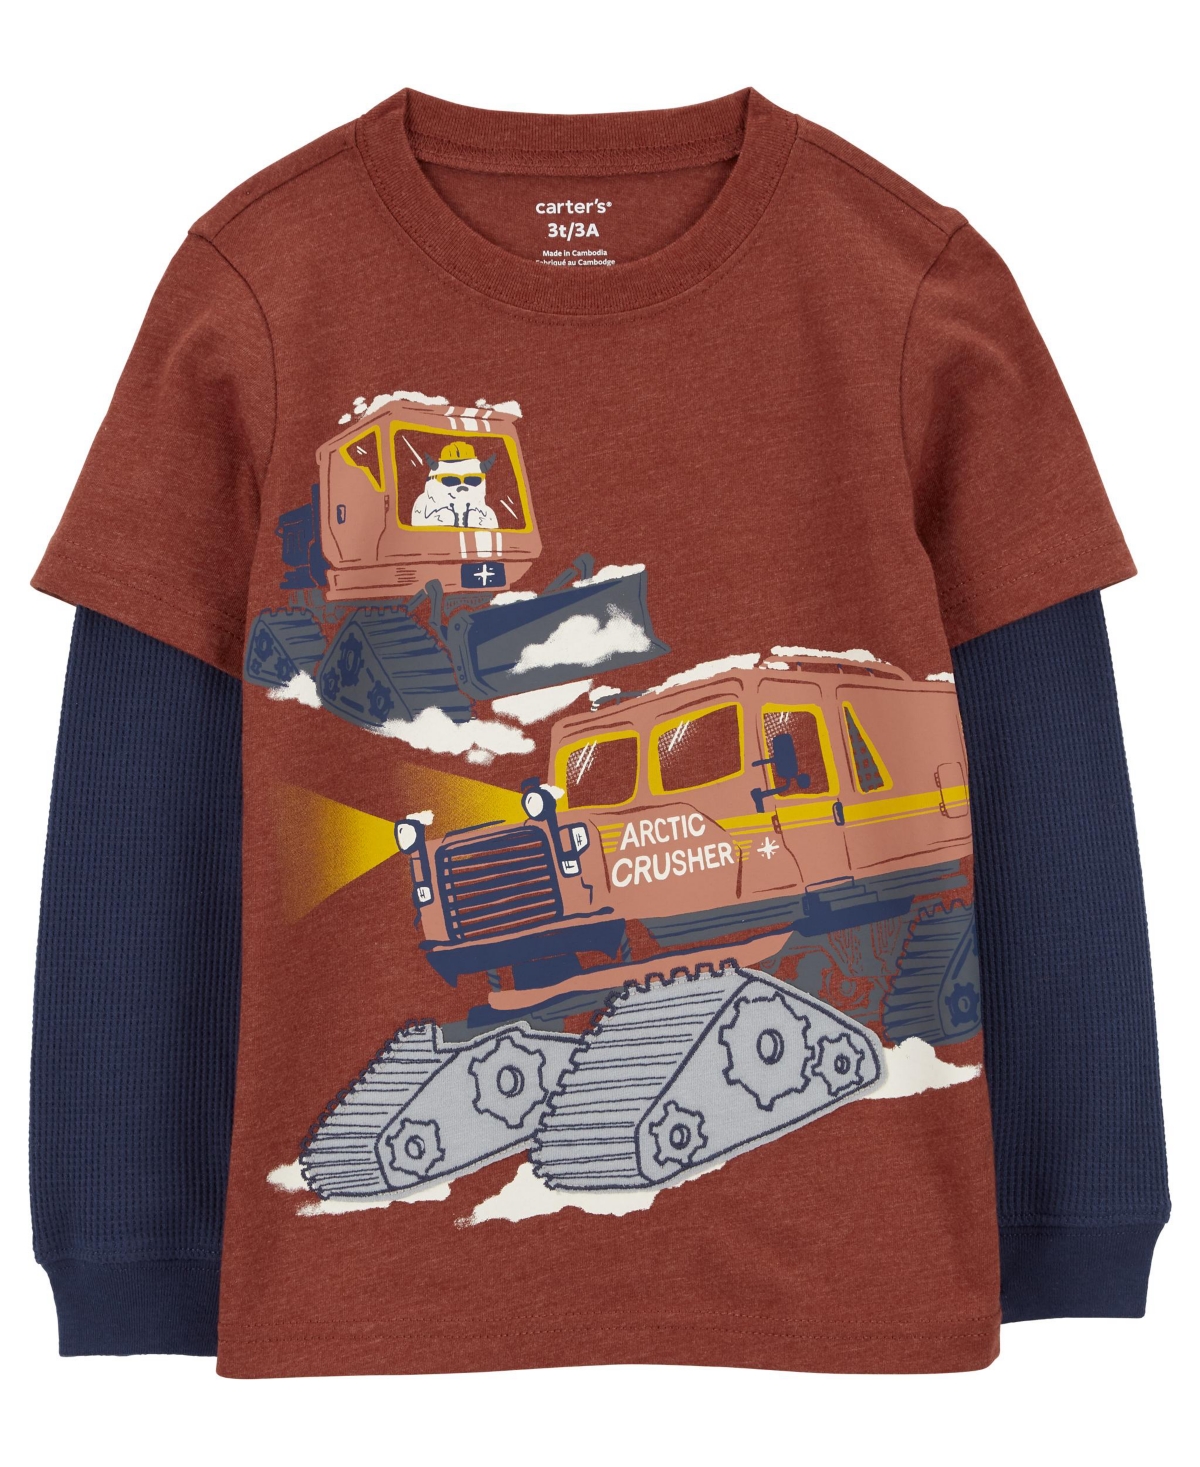 Carter's Babies' Toddler Boys Snow Plow Layered Look Long Sleeve T-shirt In Brown